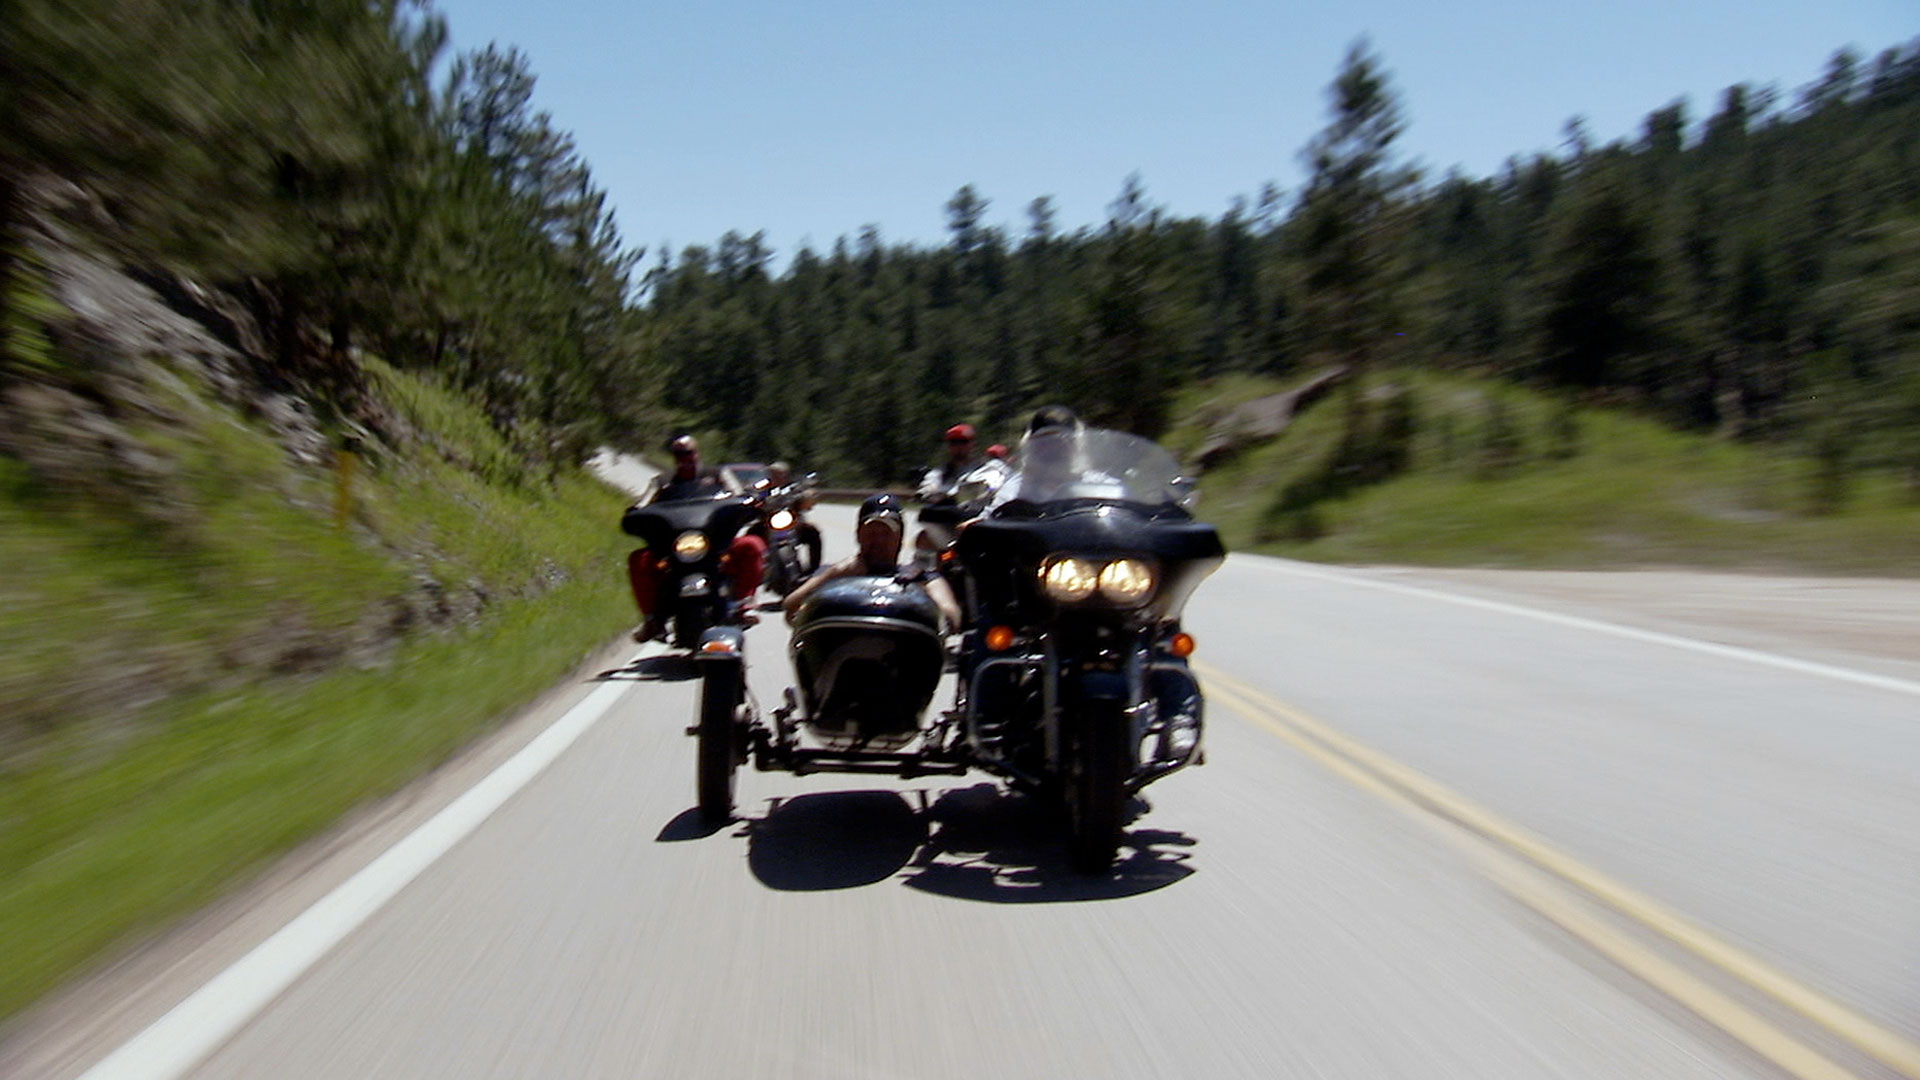 Larry Rides with the Hells Angels